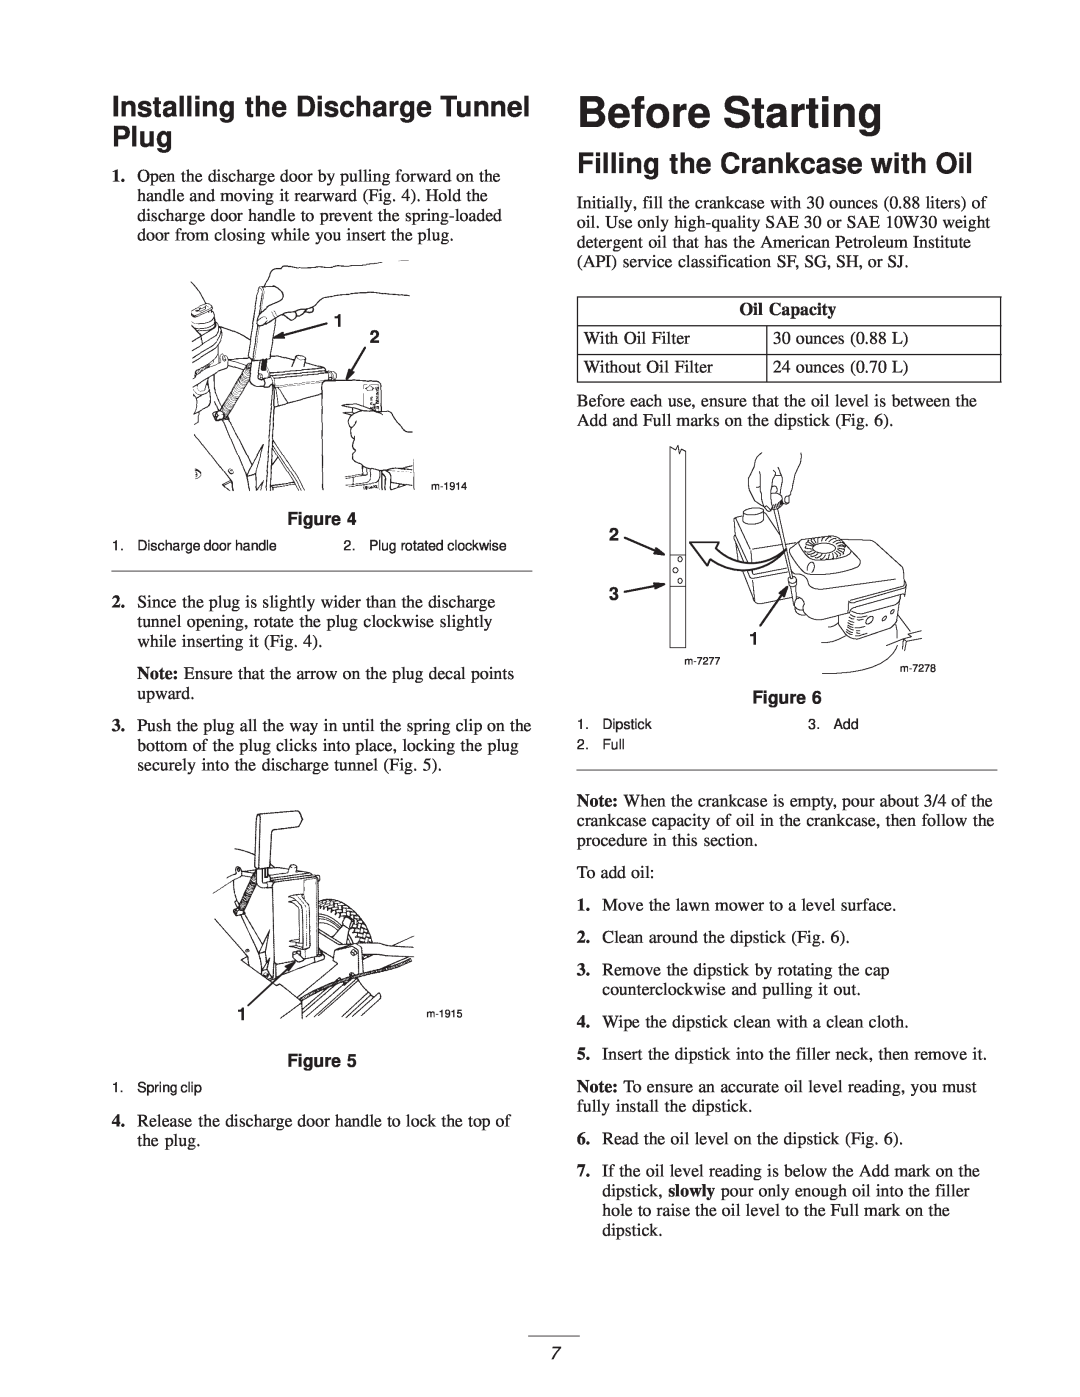 Exmark M216KASPC manual Before Starting, Installing the Discharge Tunnel Plug, Filling the Crankcase with Oil 